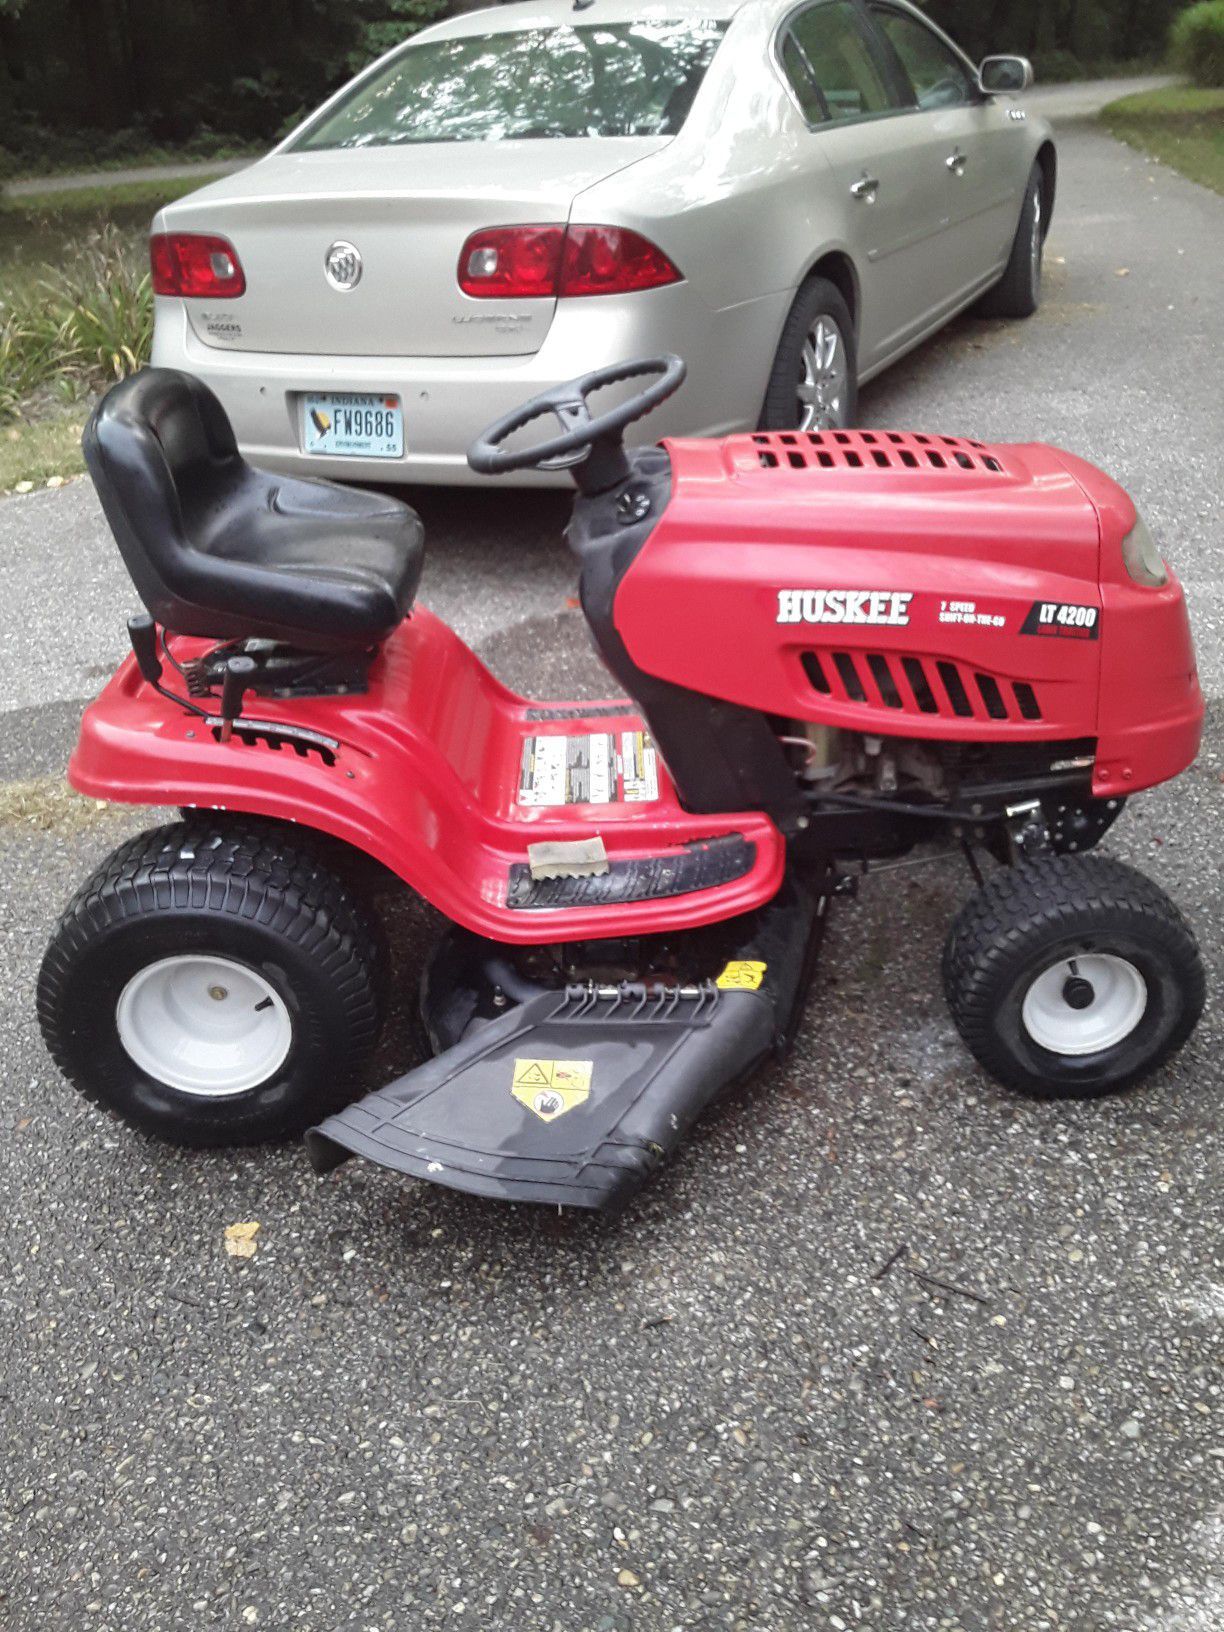 Huskee LT4200 lawn tractor